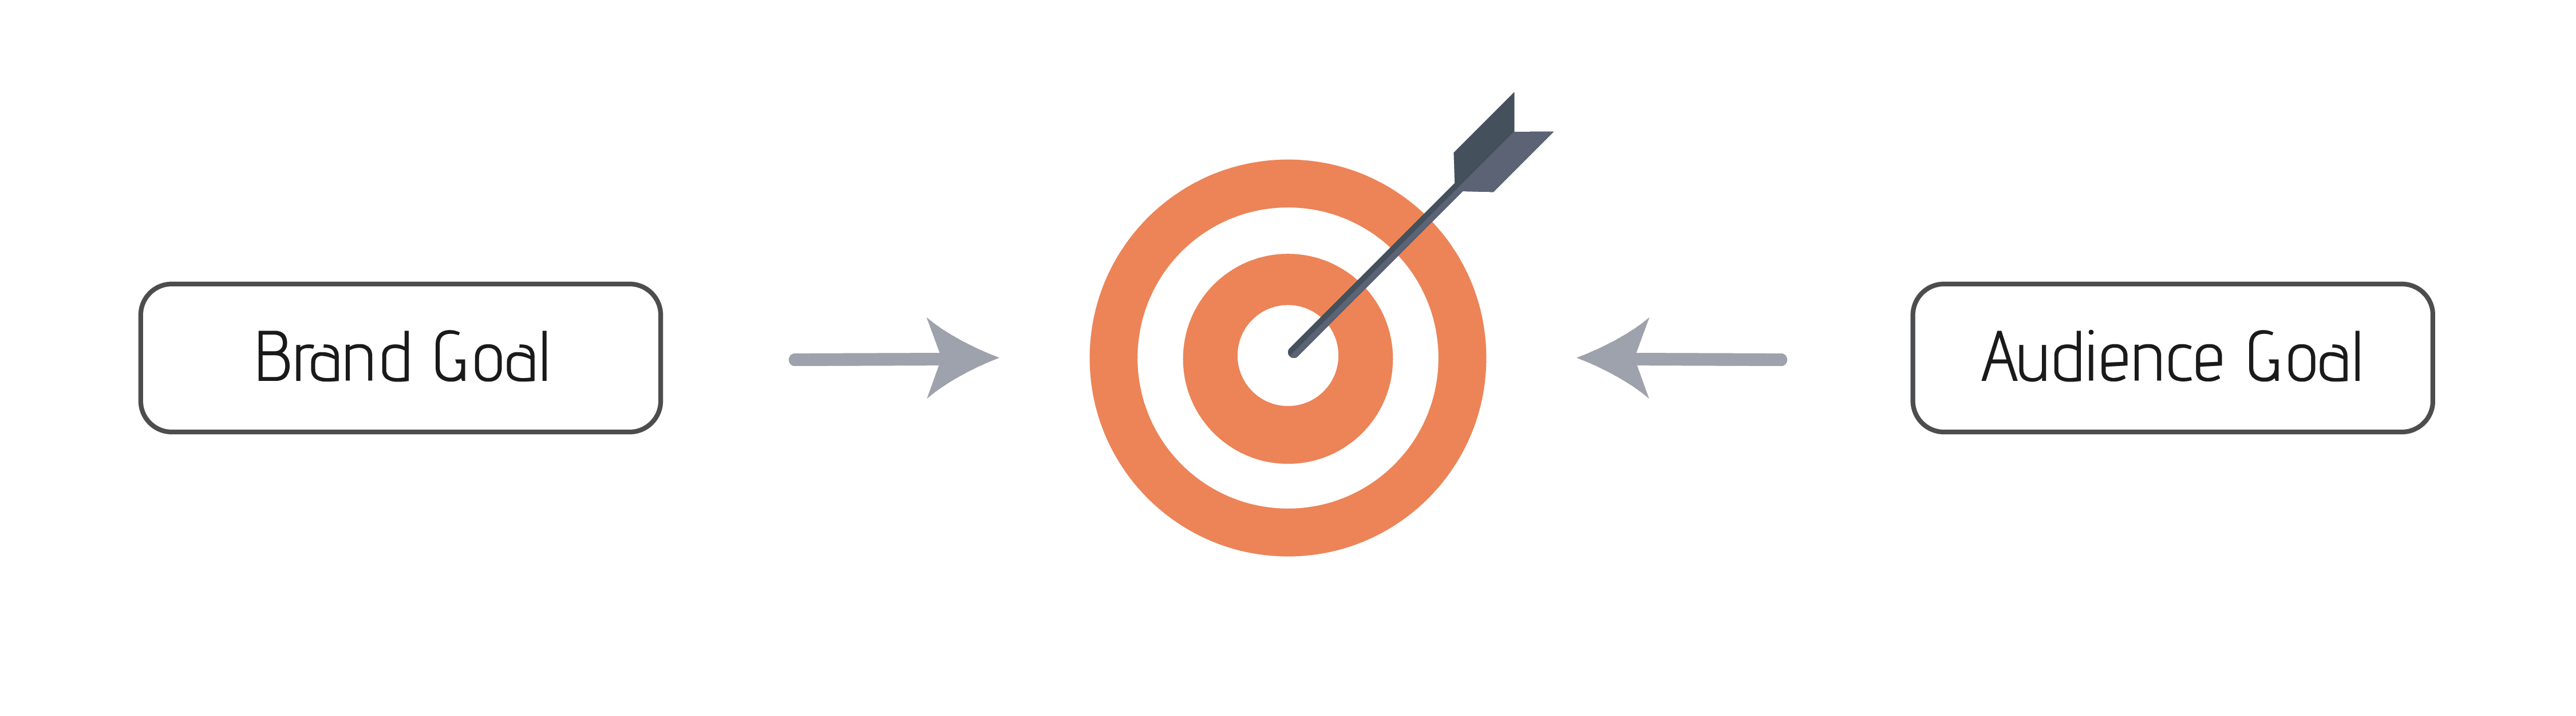 Brand content goals vs. Audience goals with a target and arrow in the middle. Exchange of value between a brand and its consumers.